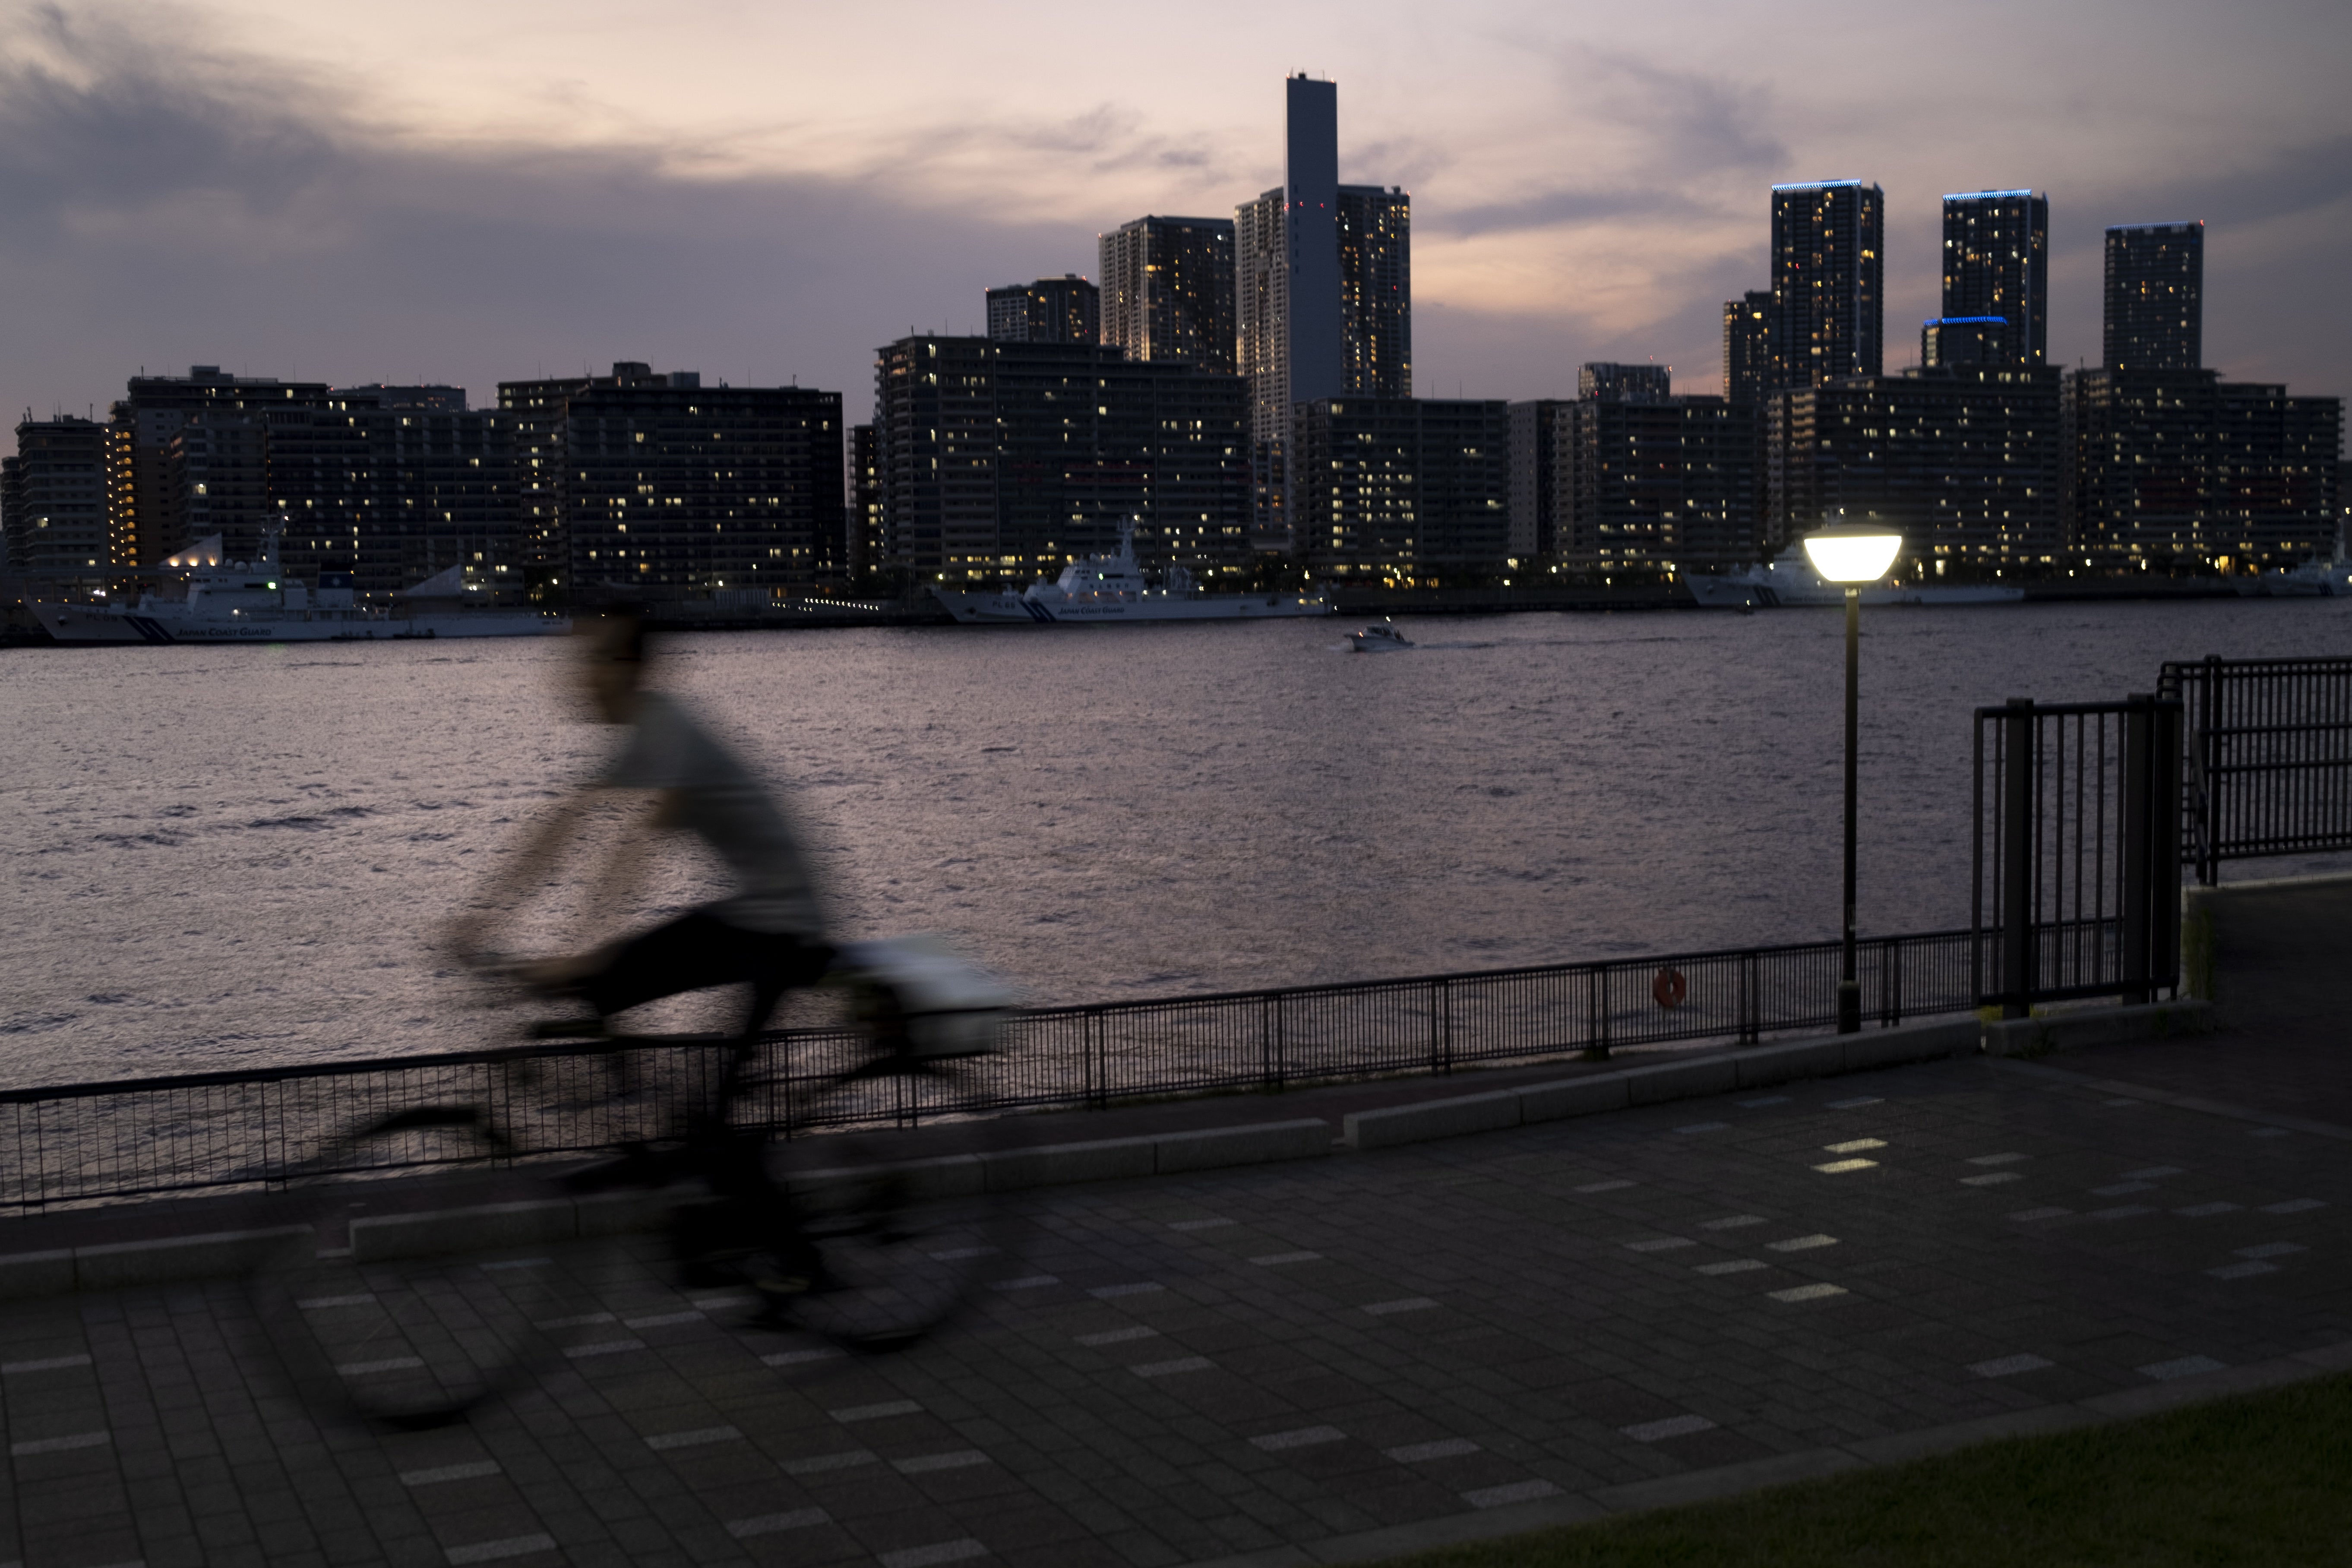 A person rides a bicycle in front of the Olympic village in Tokyo